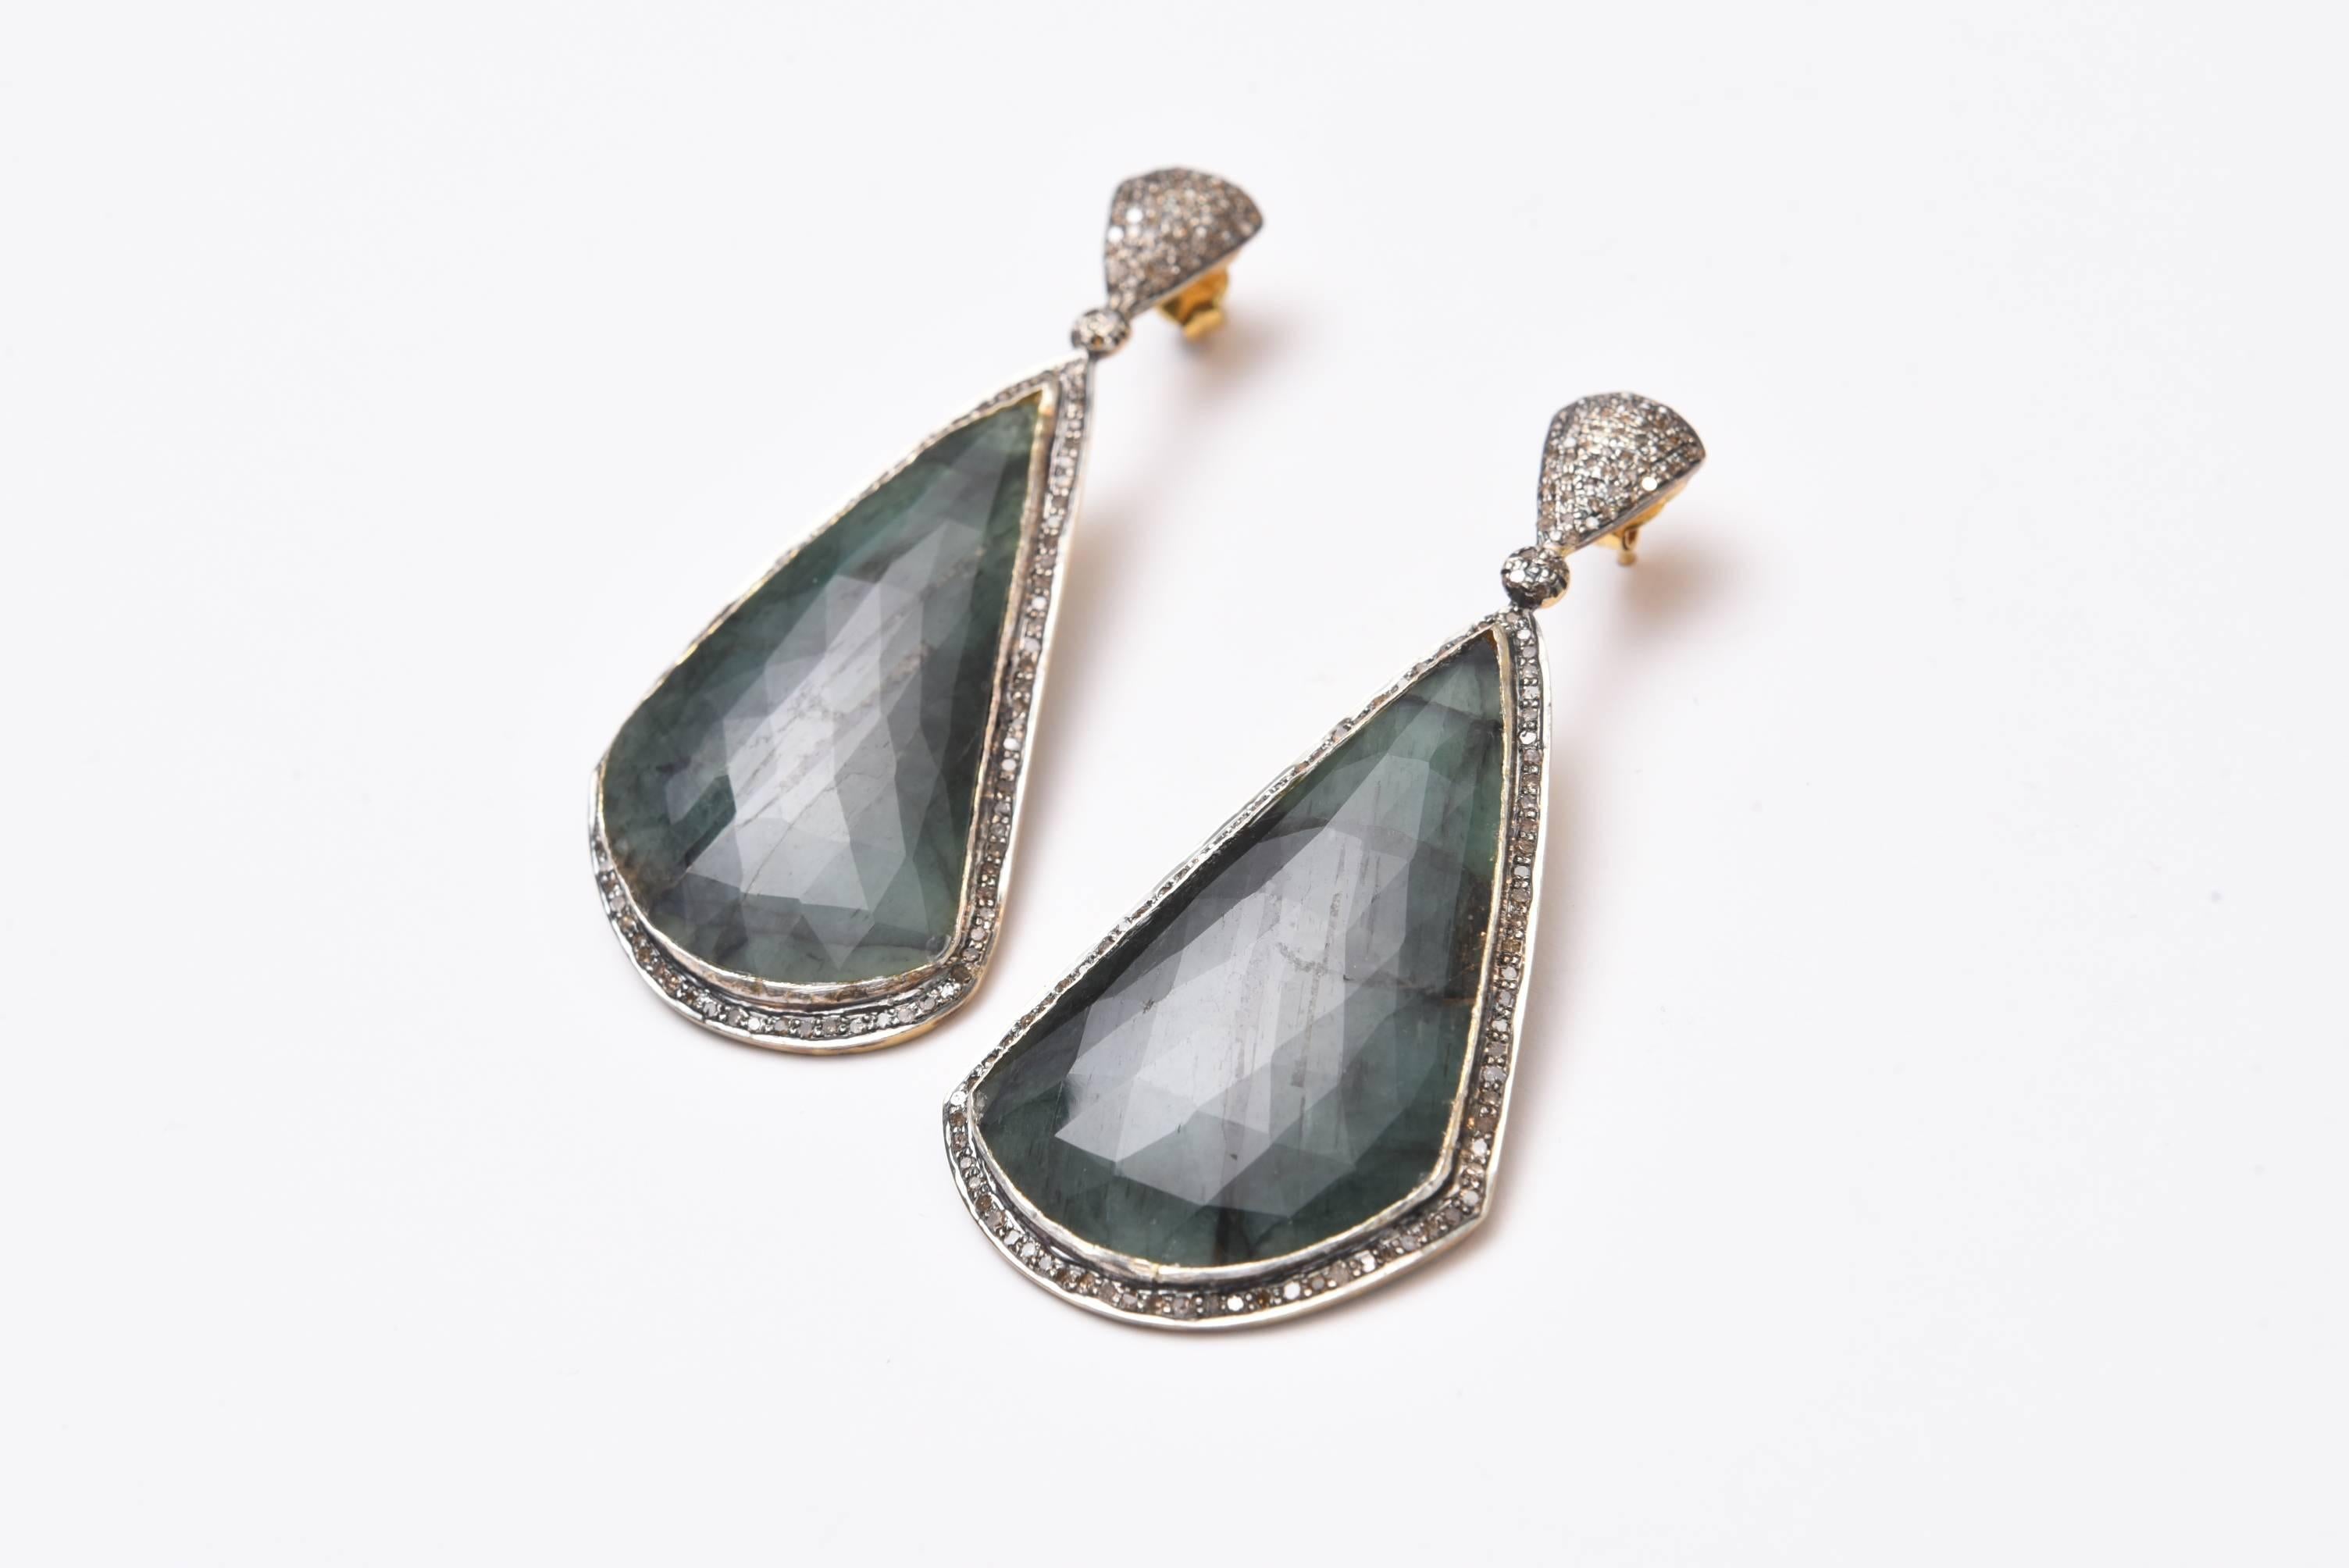 Extraordinary size of rose cut emeralds in their natural state bordered in pave`set diamonds in sterling silver.  Diamonds on the post as well with 18K gold earring posts for pierced ears.  Emeralds are 50.75 carats and diamonds are 1.90 carats. 